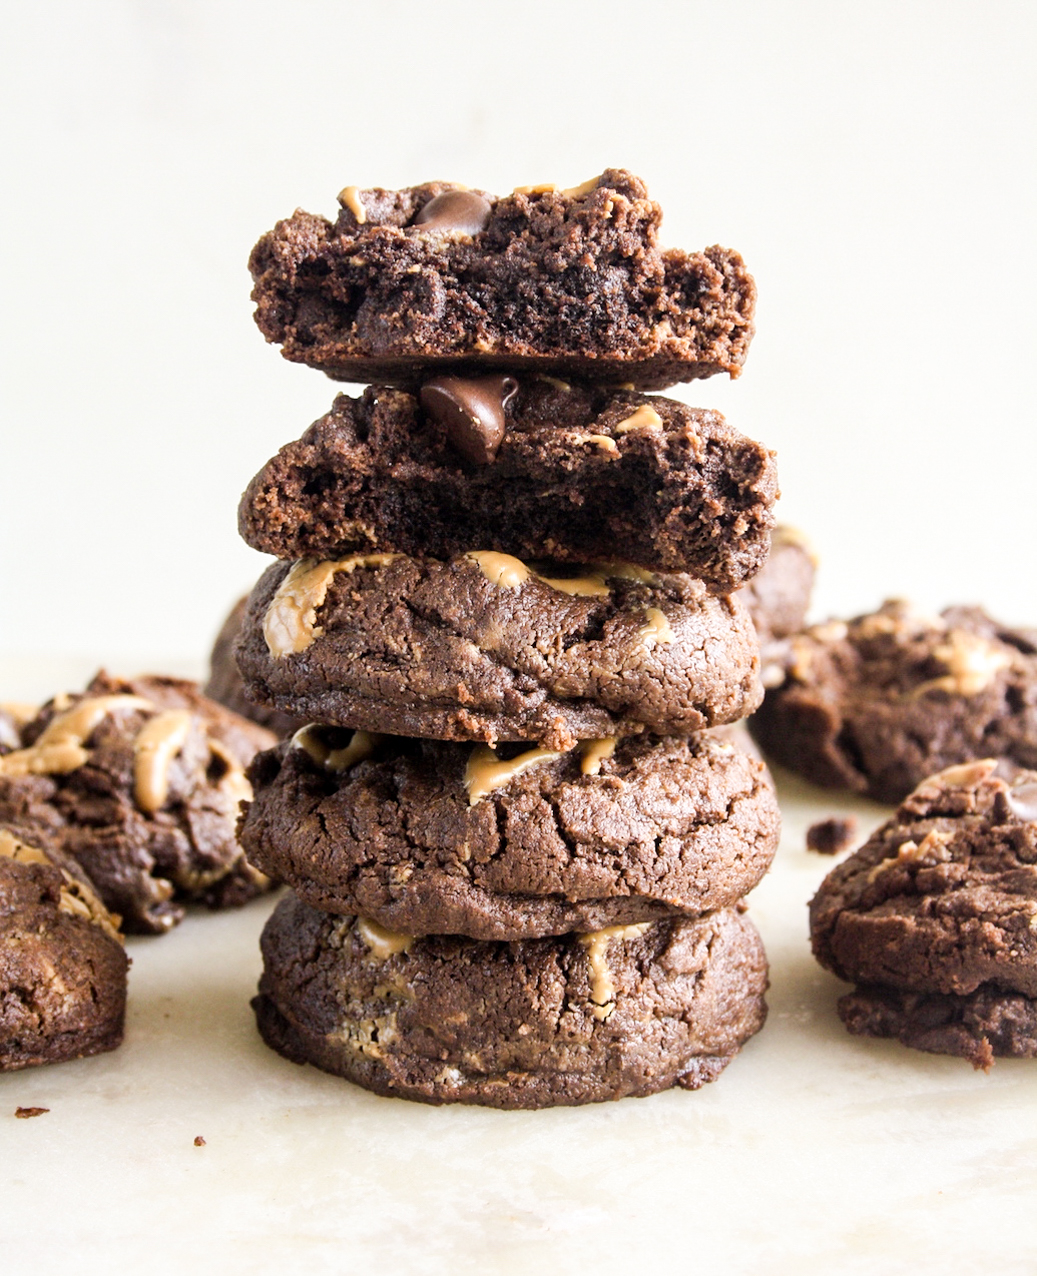 Thick and brownie-like chocolate peanut butter cookies